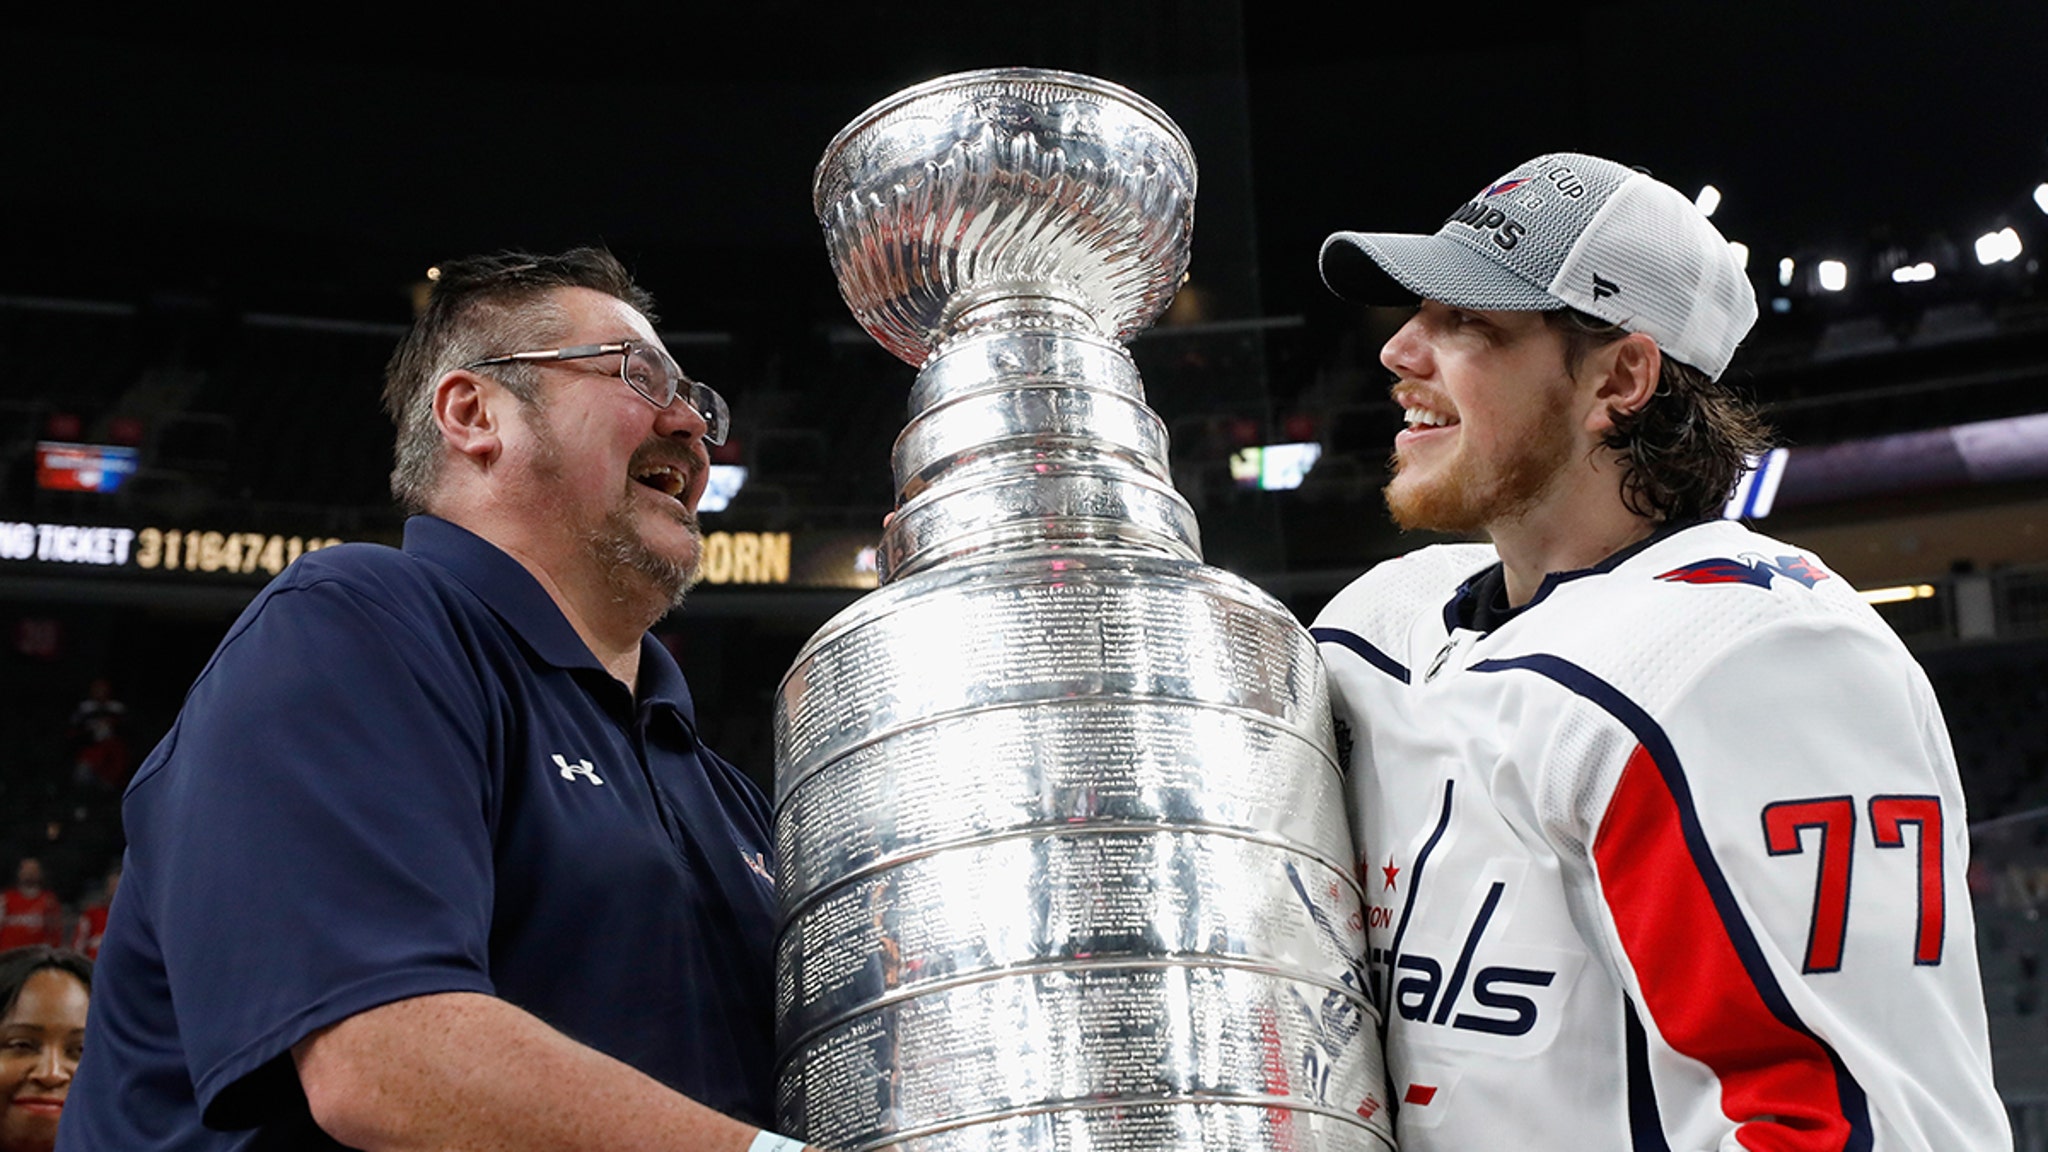 Valley News - For Oshie and Father, a Tearful Title